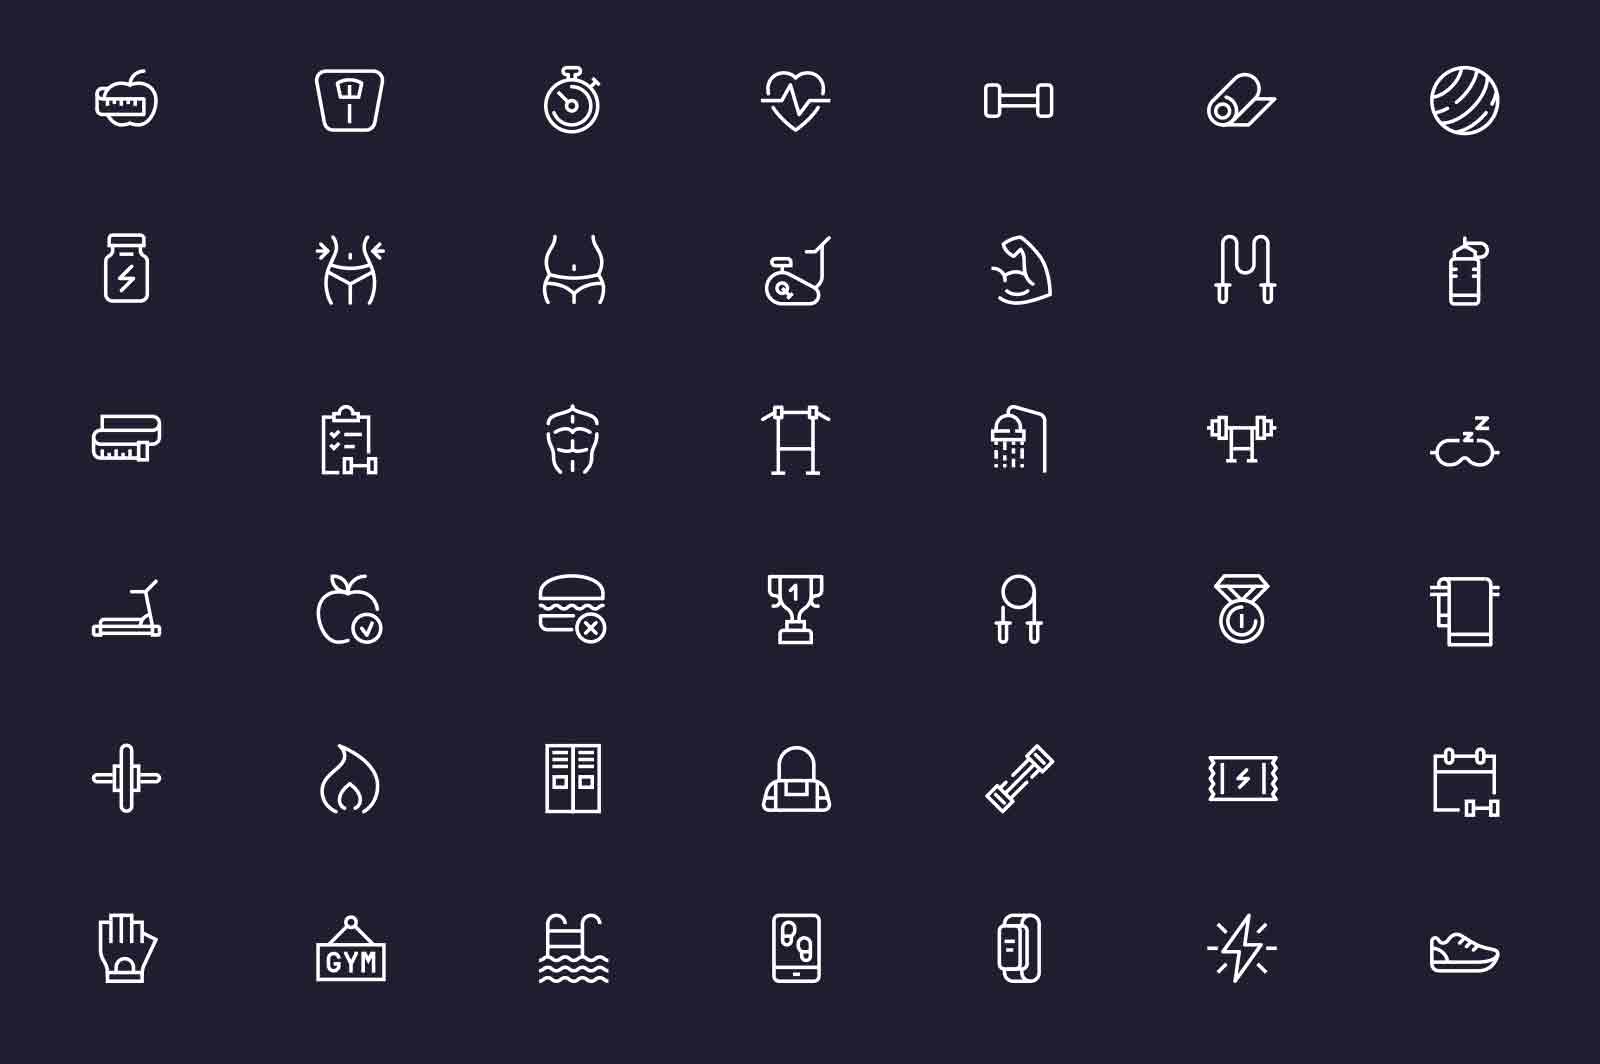 Fitness and health related icons set vector illustration. Support active lifestyle line icon. Dark background